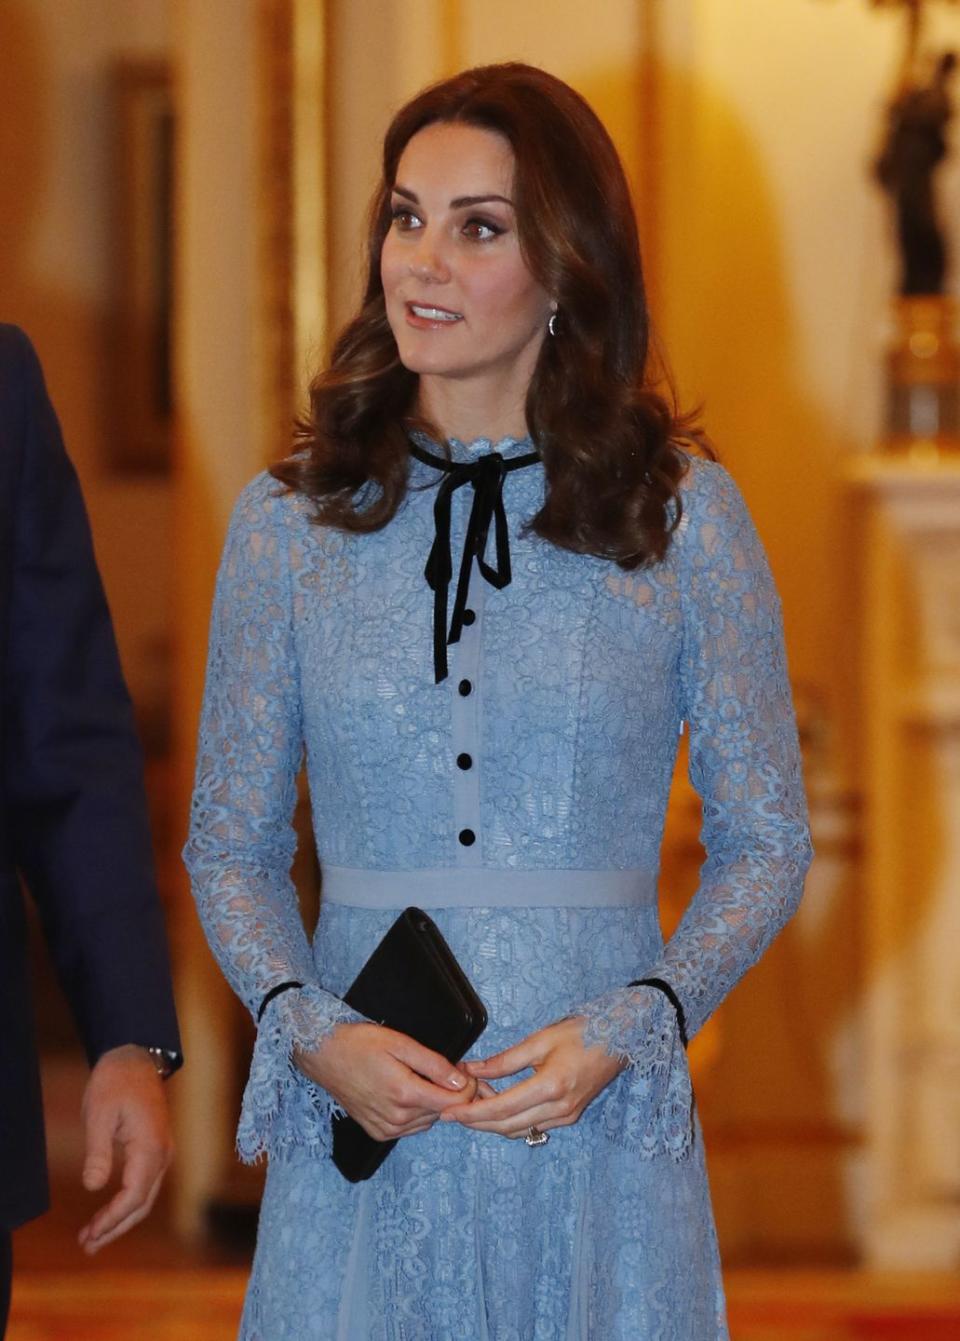 Kate in Blue With a Black Bow